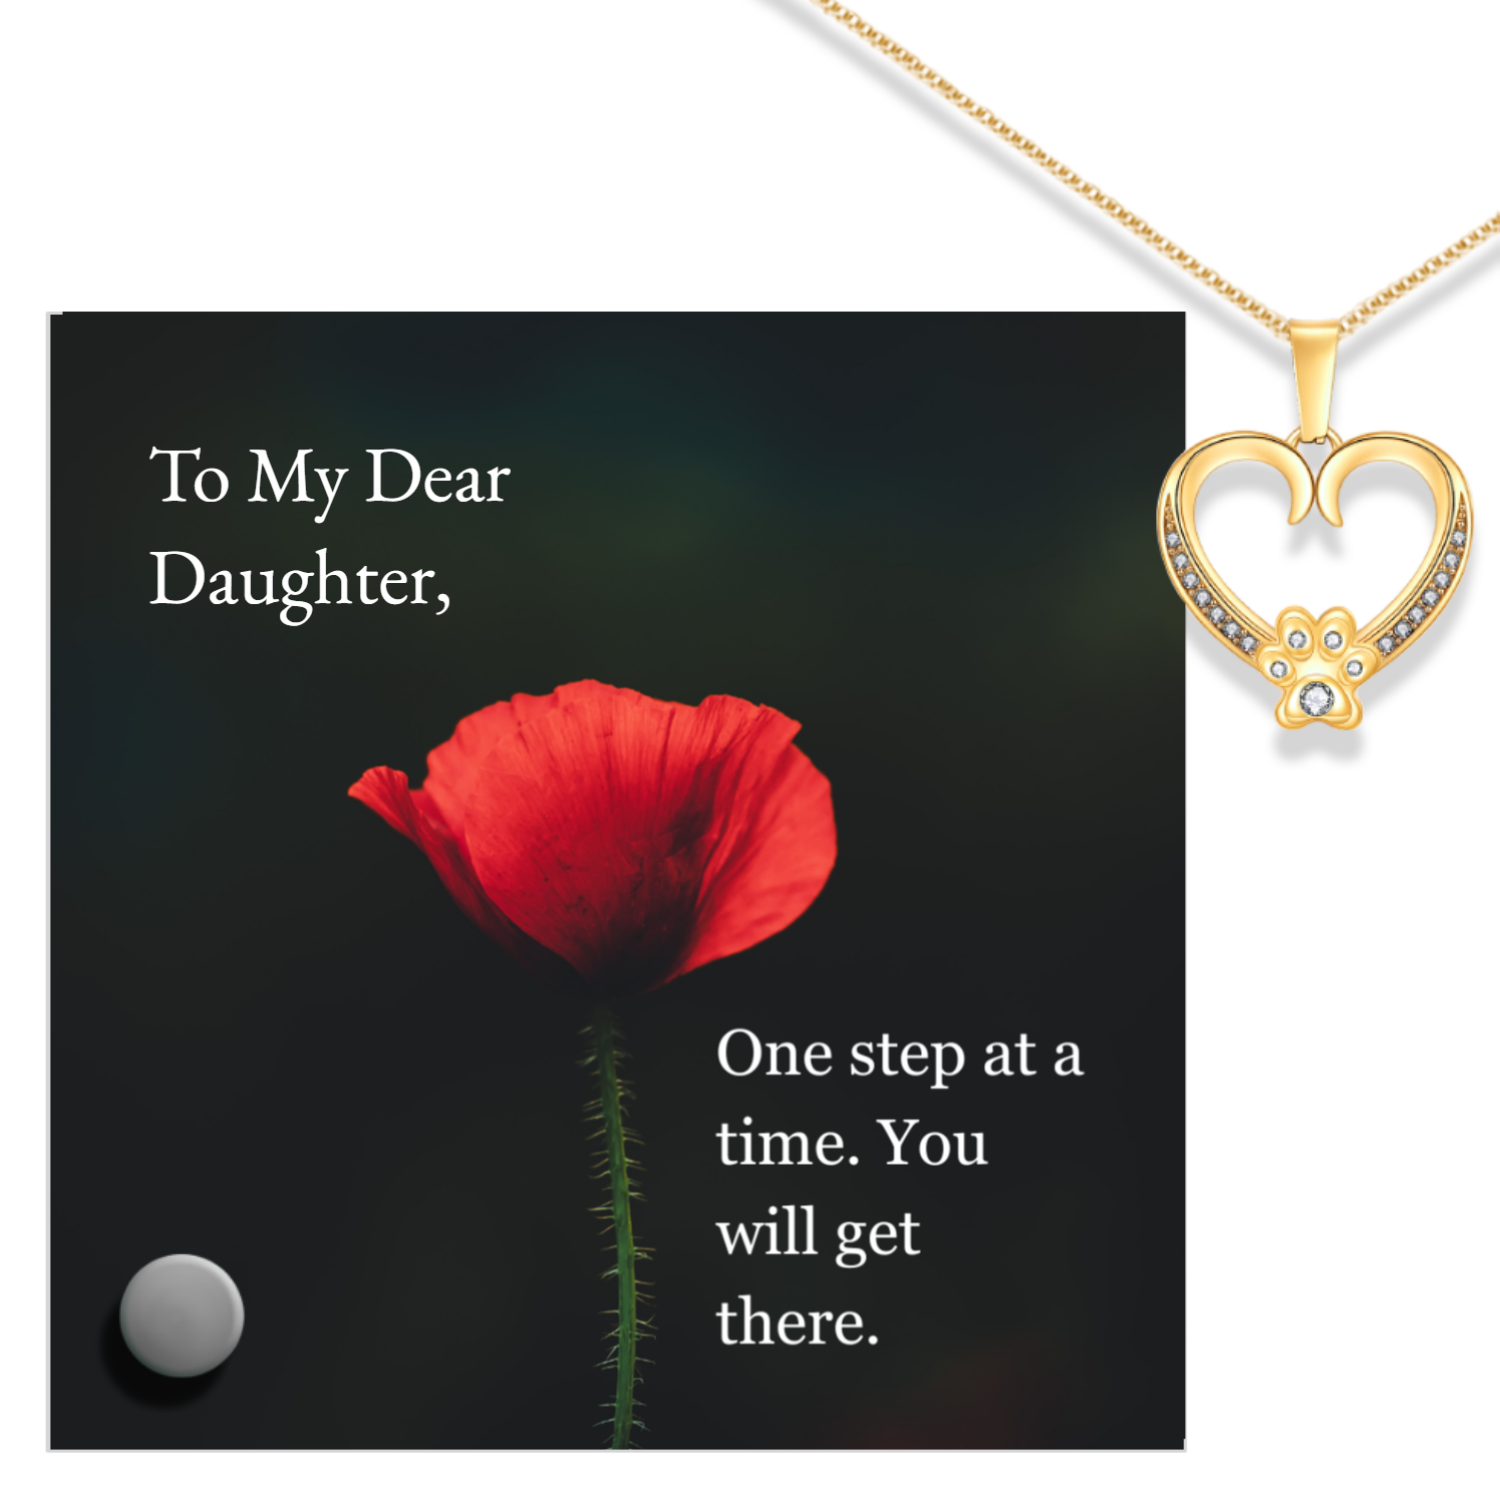 Personalized Necklaces - To My Daughter: Gold Paw Necklace + Glass Message Display 